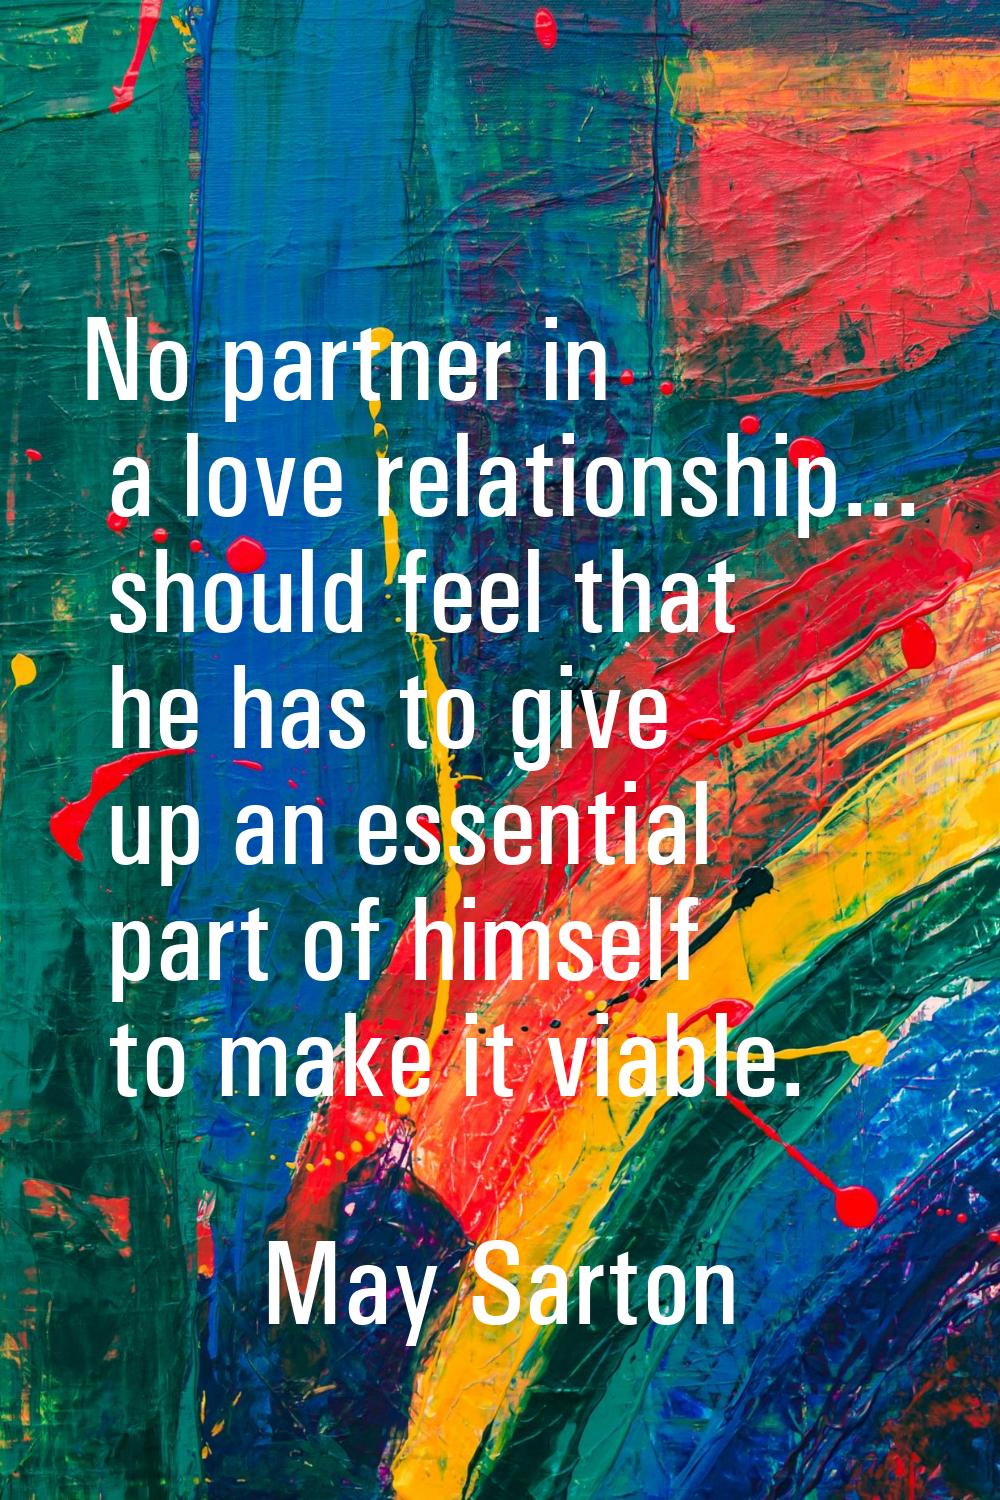 No partner in a love relationship... should feel that he has to give up an essential part of himsel